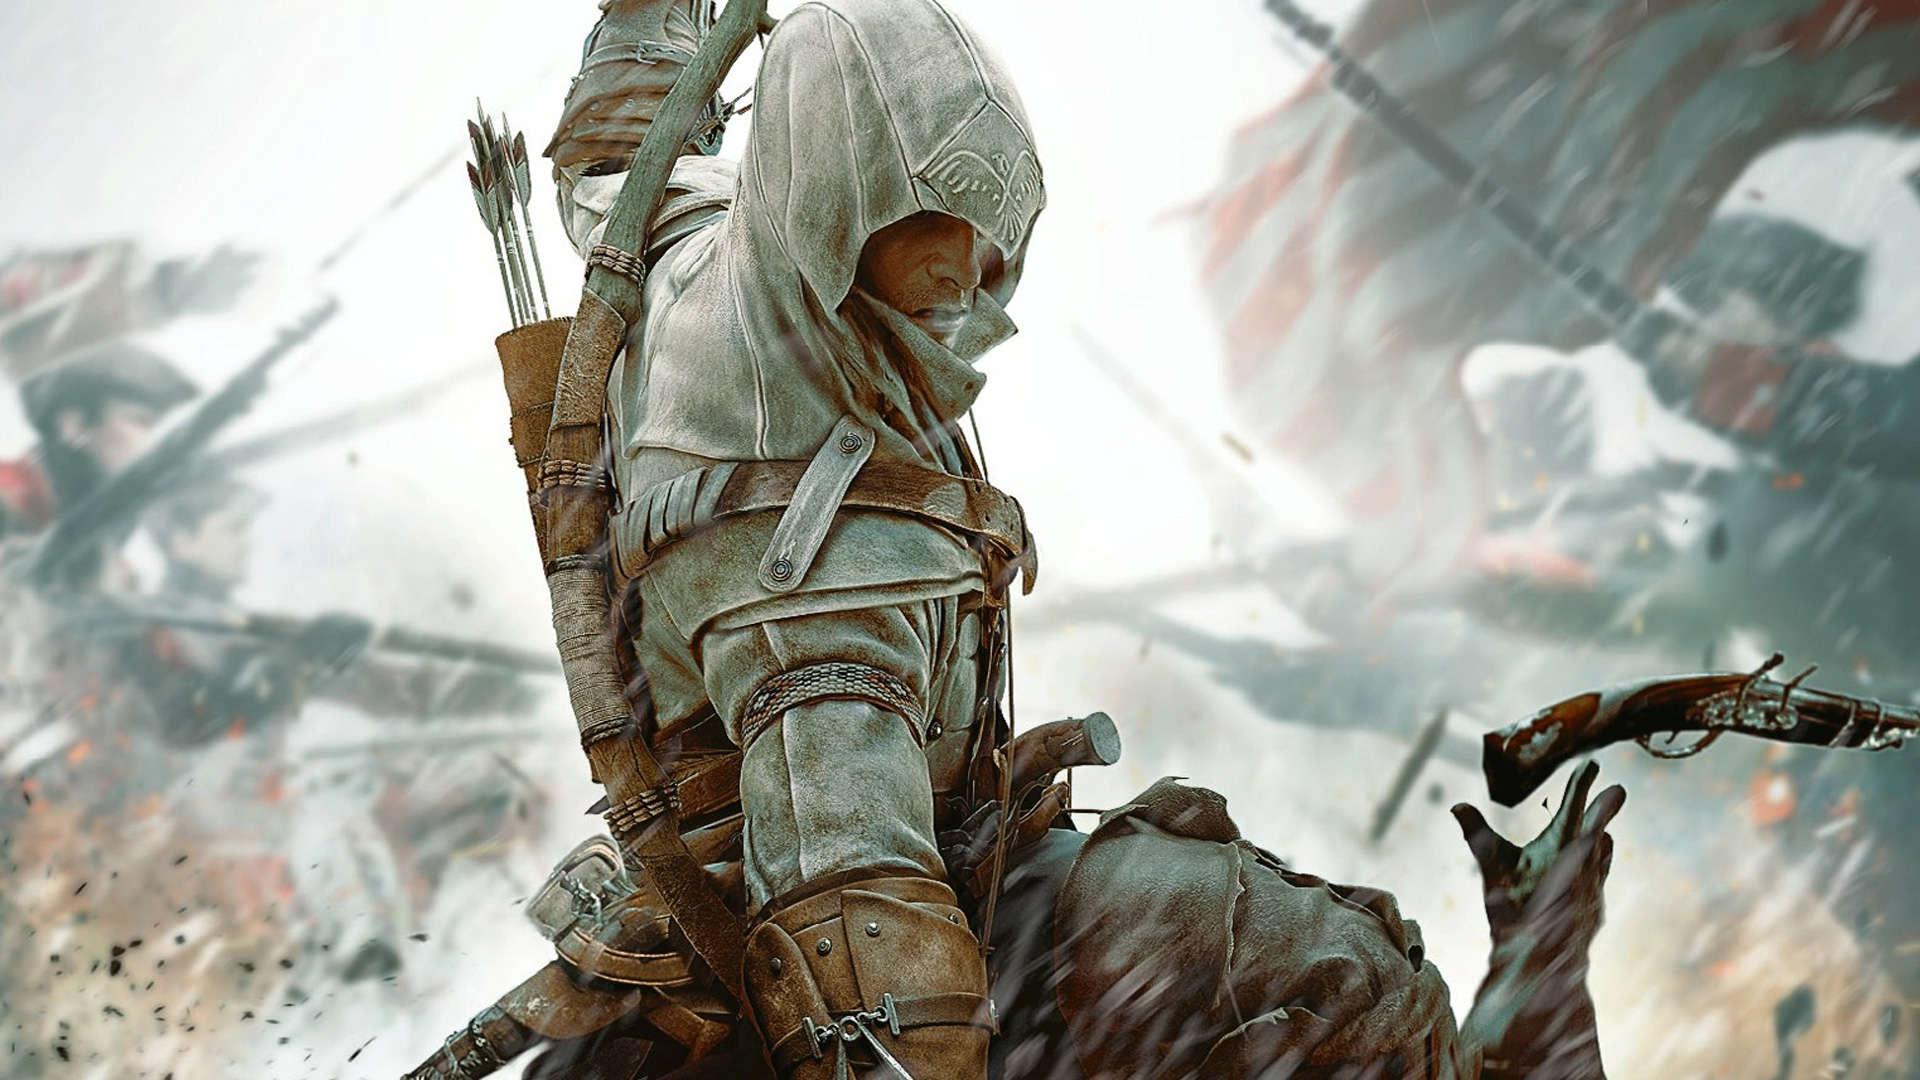 23 Assassins Creed 3 Wallpapers in HD 574 Assassin Creed